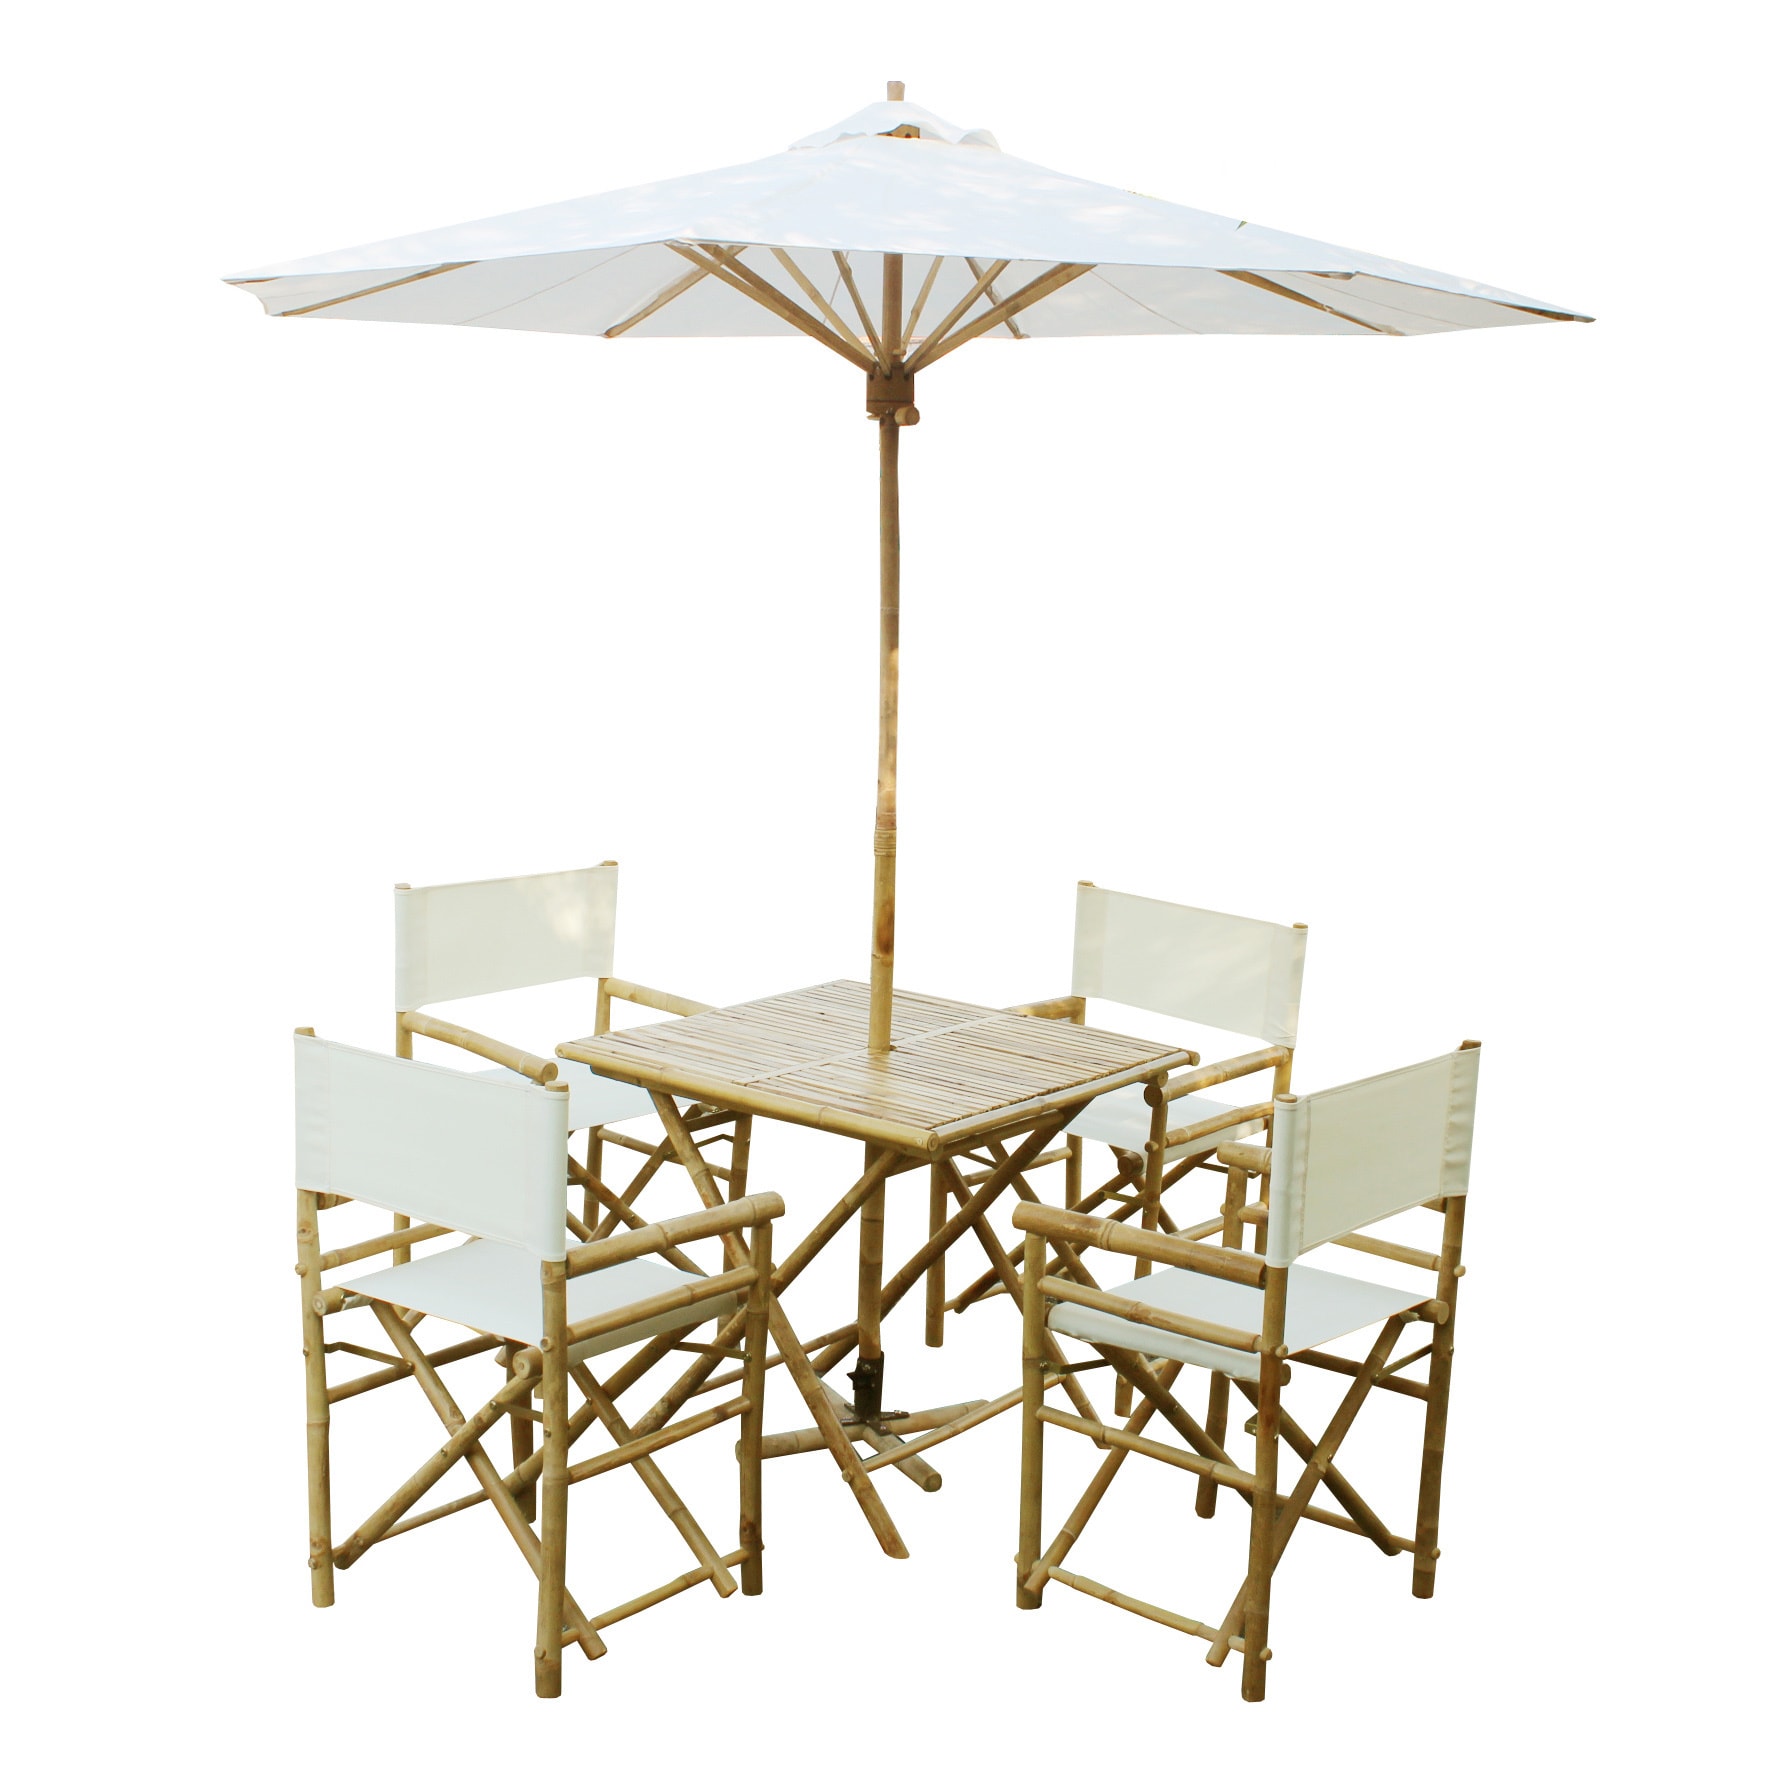 Zew Handcrafted Bamboo 6-piece Square Patio Set